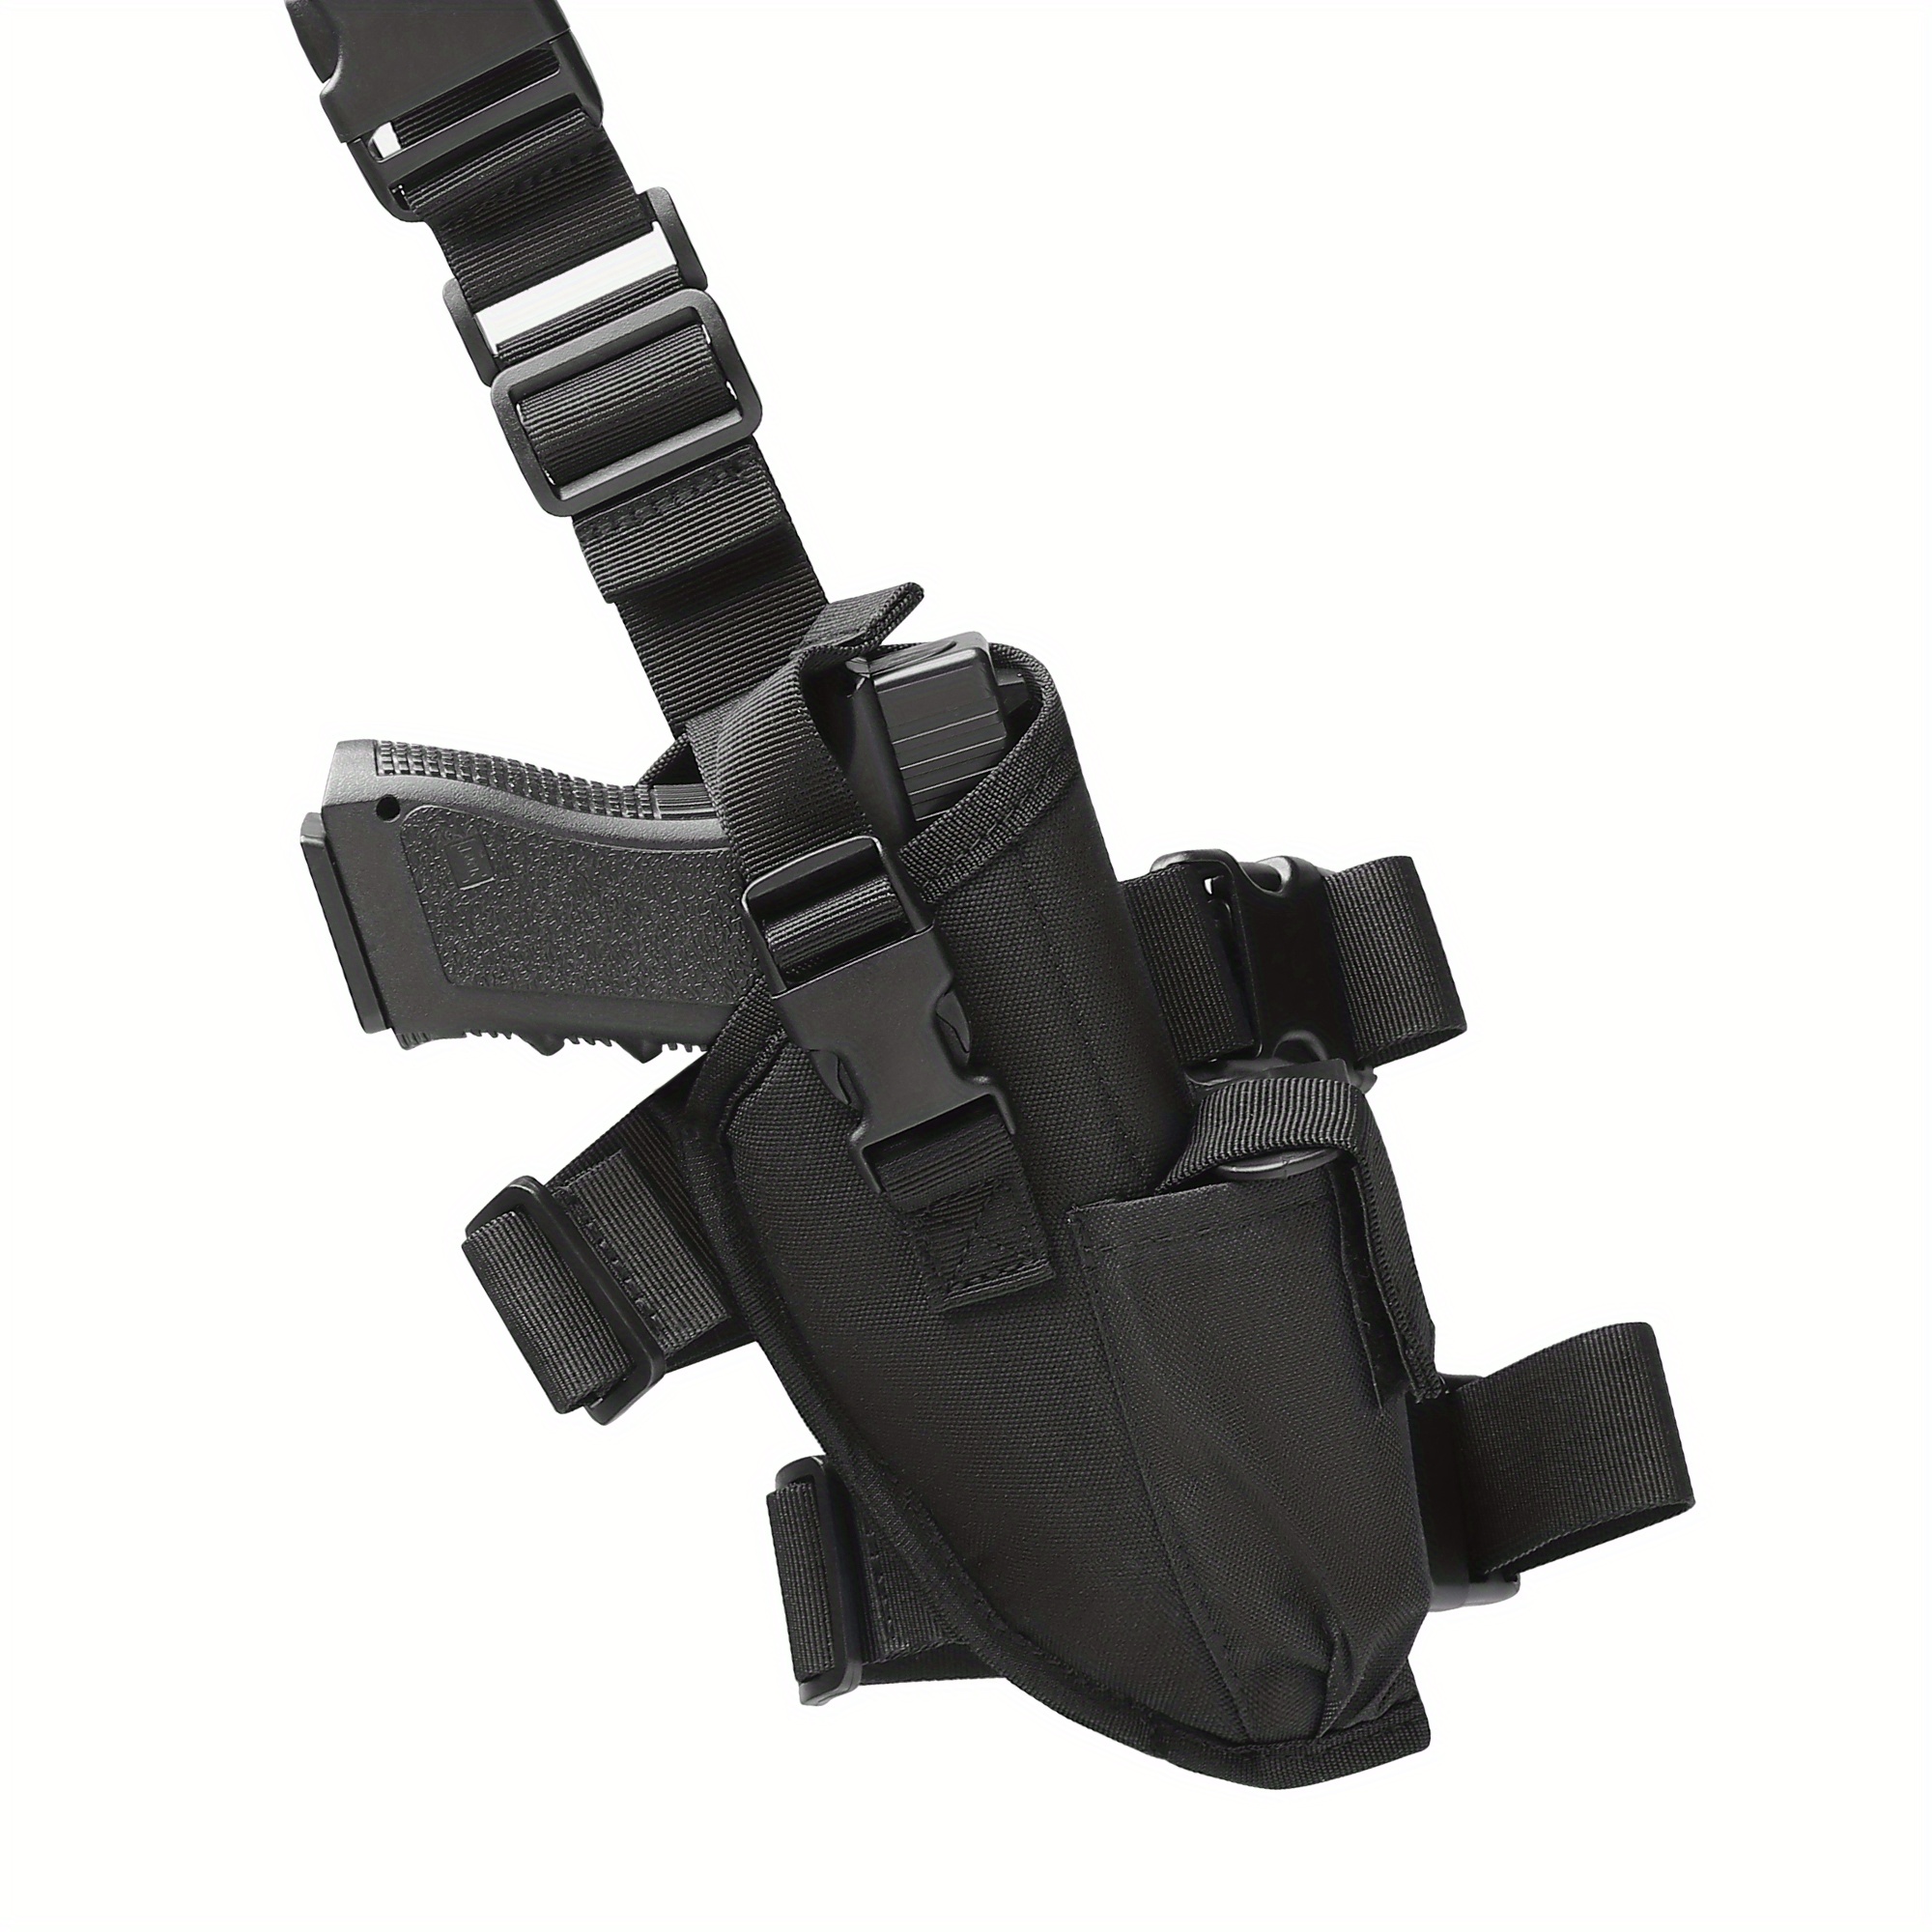 ASETIC Drop Leg Holster for Pistol- Right Handed Tactical Thigh